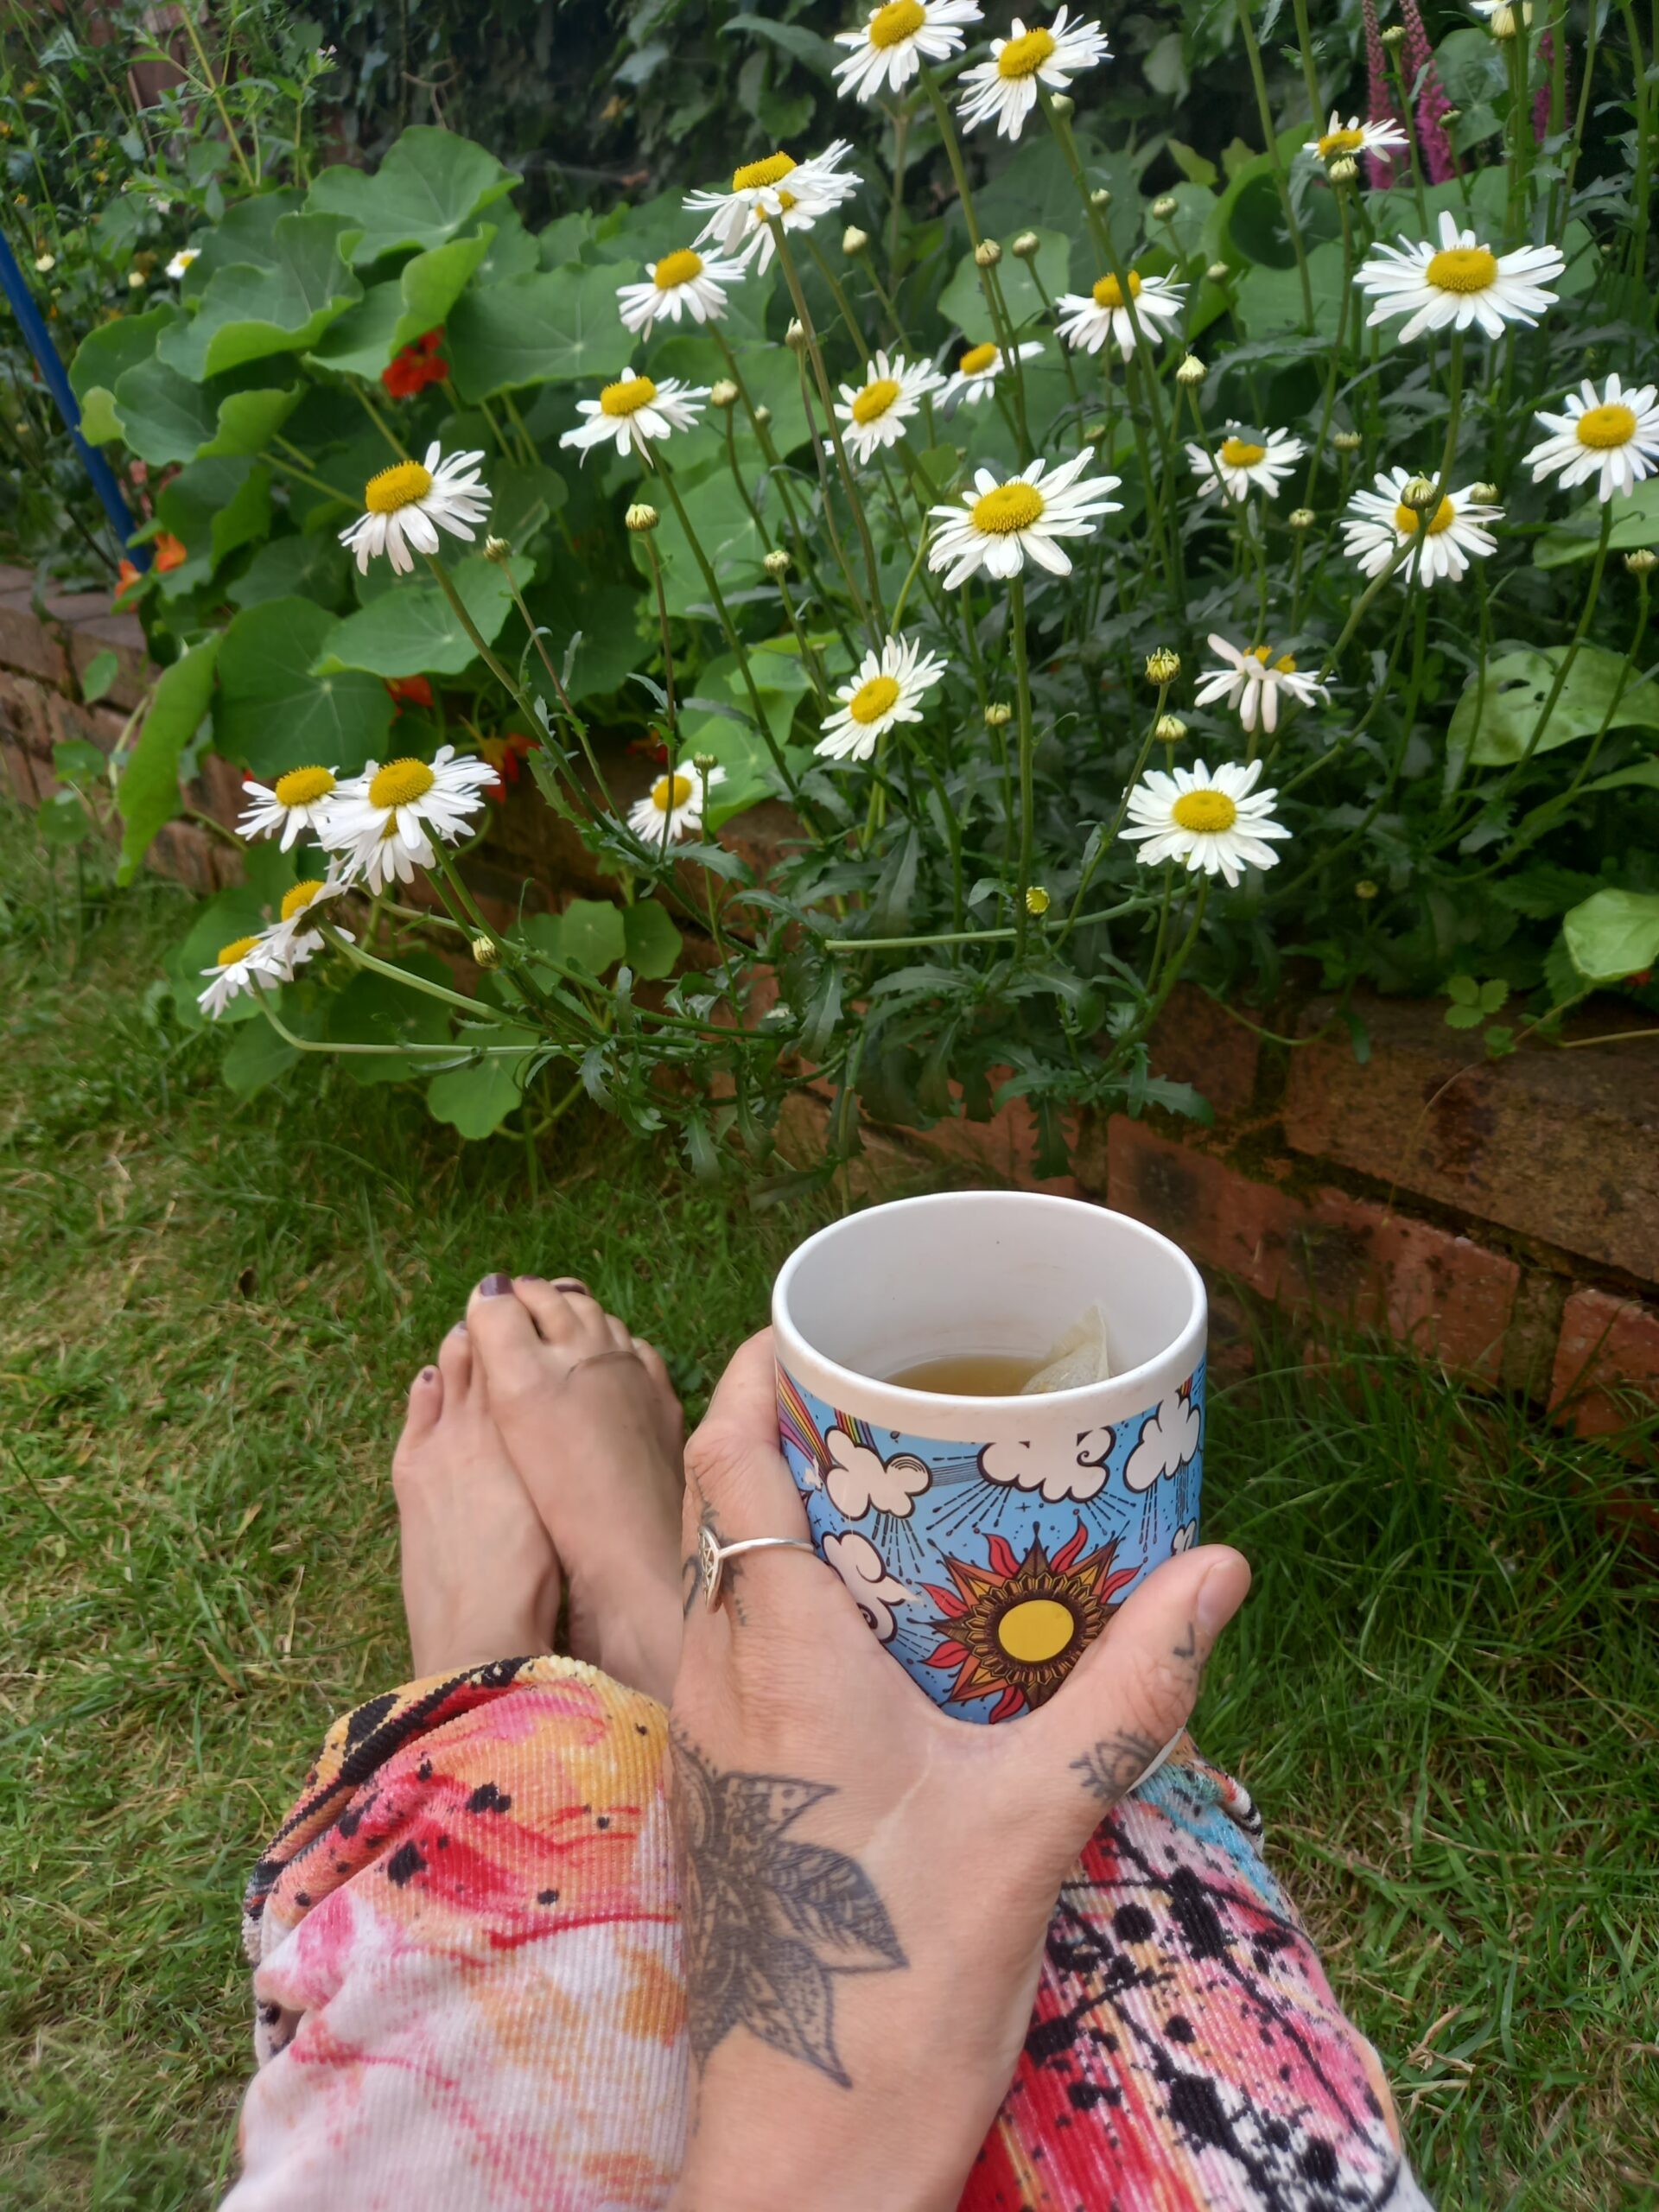 daisies, chamomile tea, lucy & yaks, moments peace,five minutes peace, gardeb, barefoot